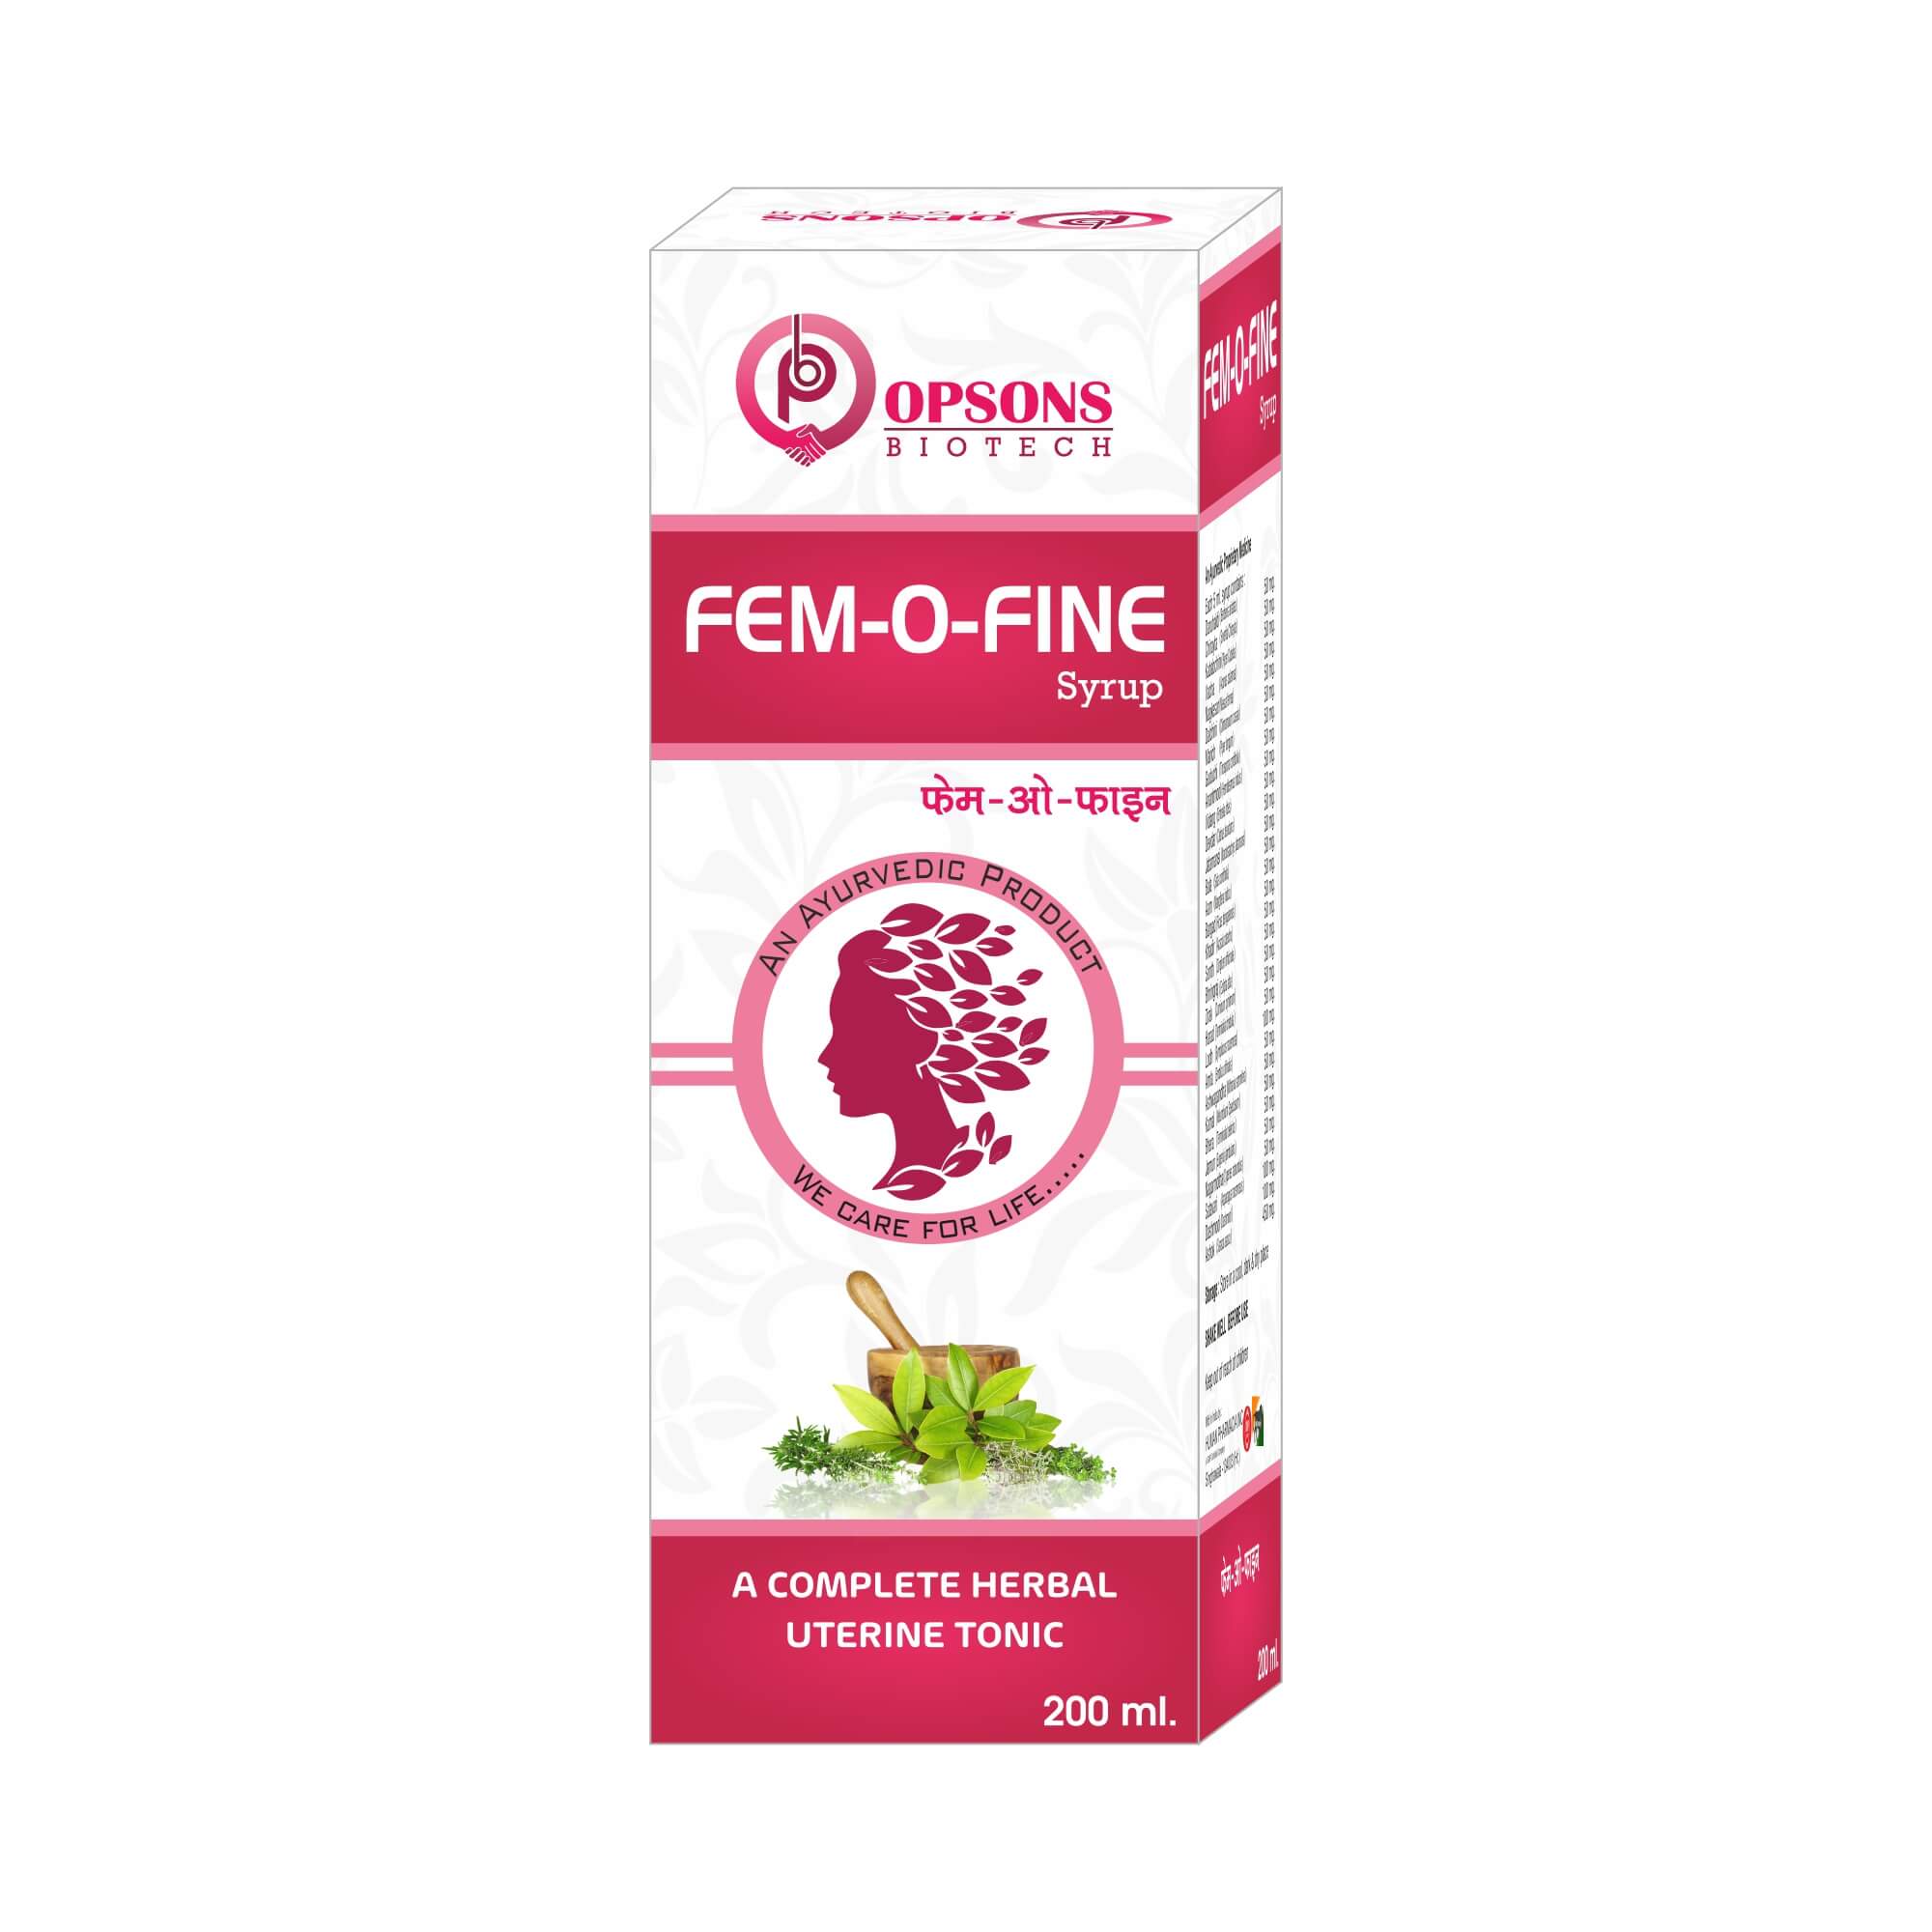 Product Name: Fem o Fine, Compositions of Fem o Fine are A Complete Herbal Uterine Tonic - Opsons Biotech